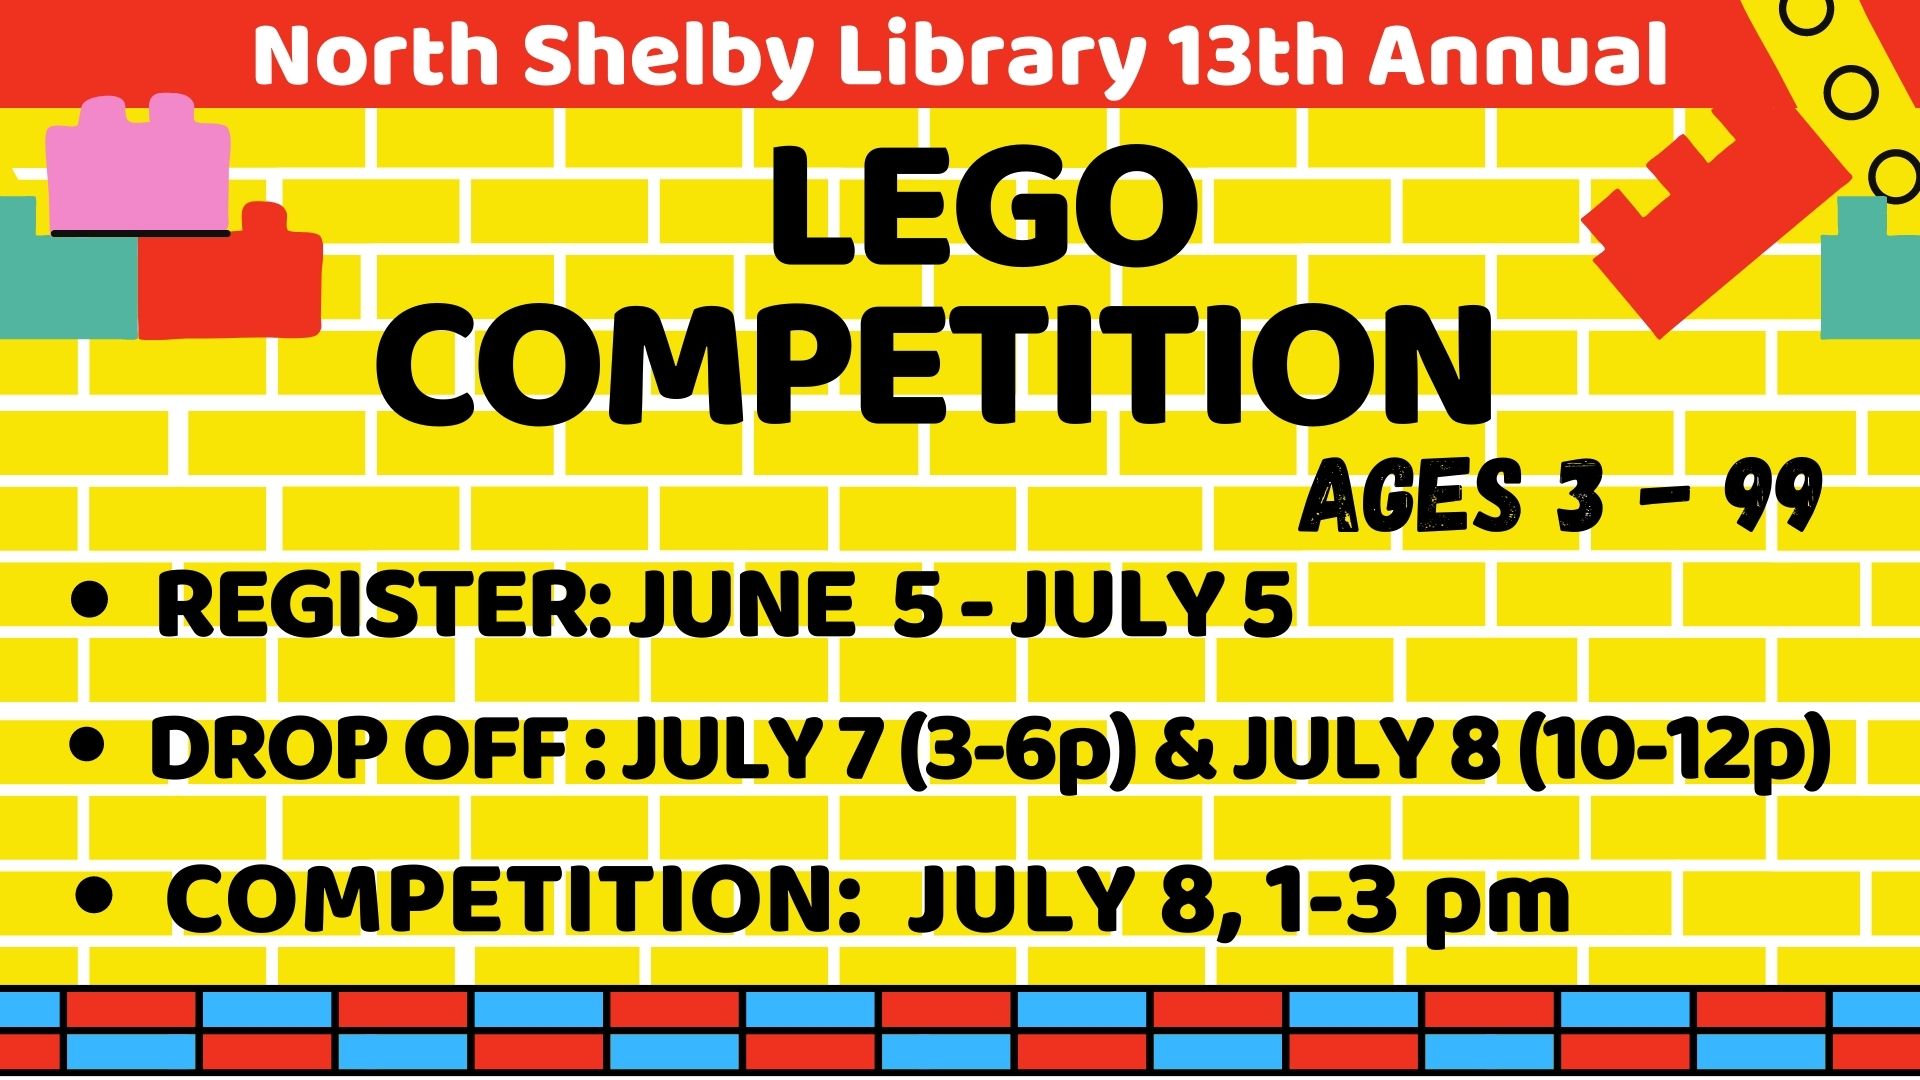 Graphic of a yellow brick wall with lego bricks scattered around.   Text reads:   North Shelby Library 13th Annual Lego Competition. Ages 3-99.  Register: June 5 - July 5.  Drop off: July 7 (3-5p) and July 8 (10-12p).  Competition: July 8, 1-3 pm.